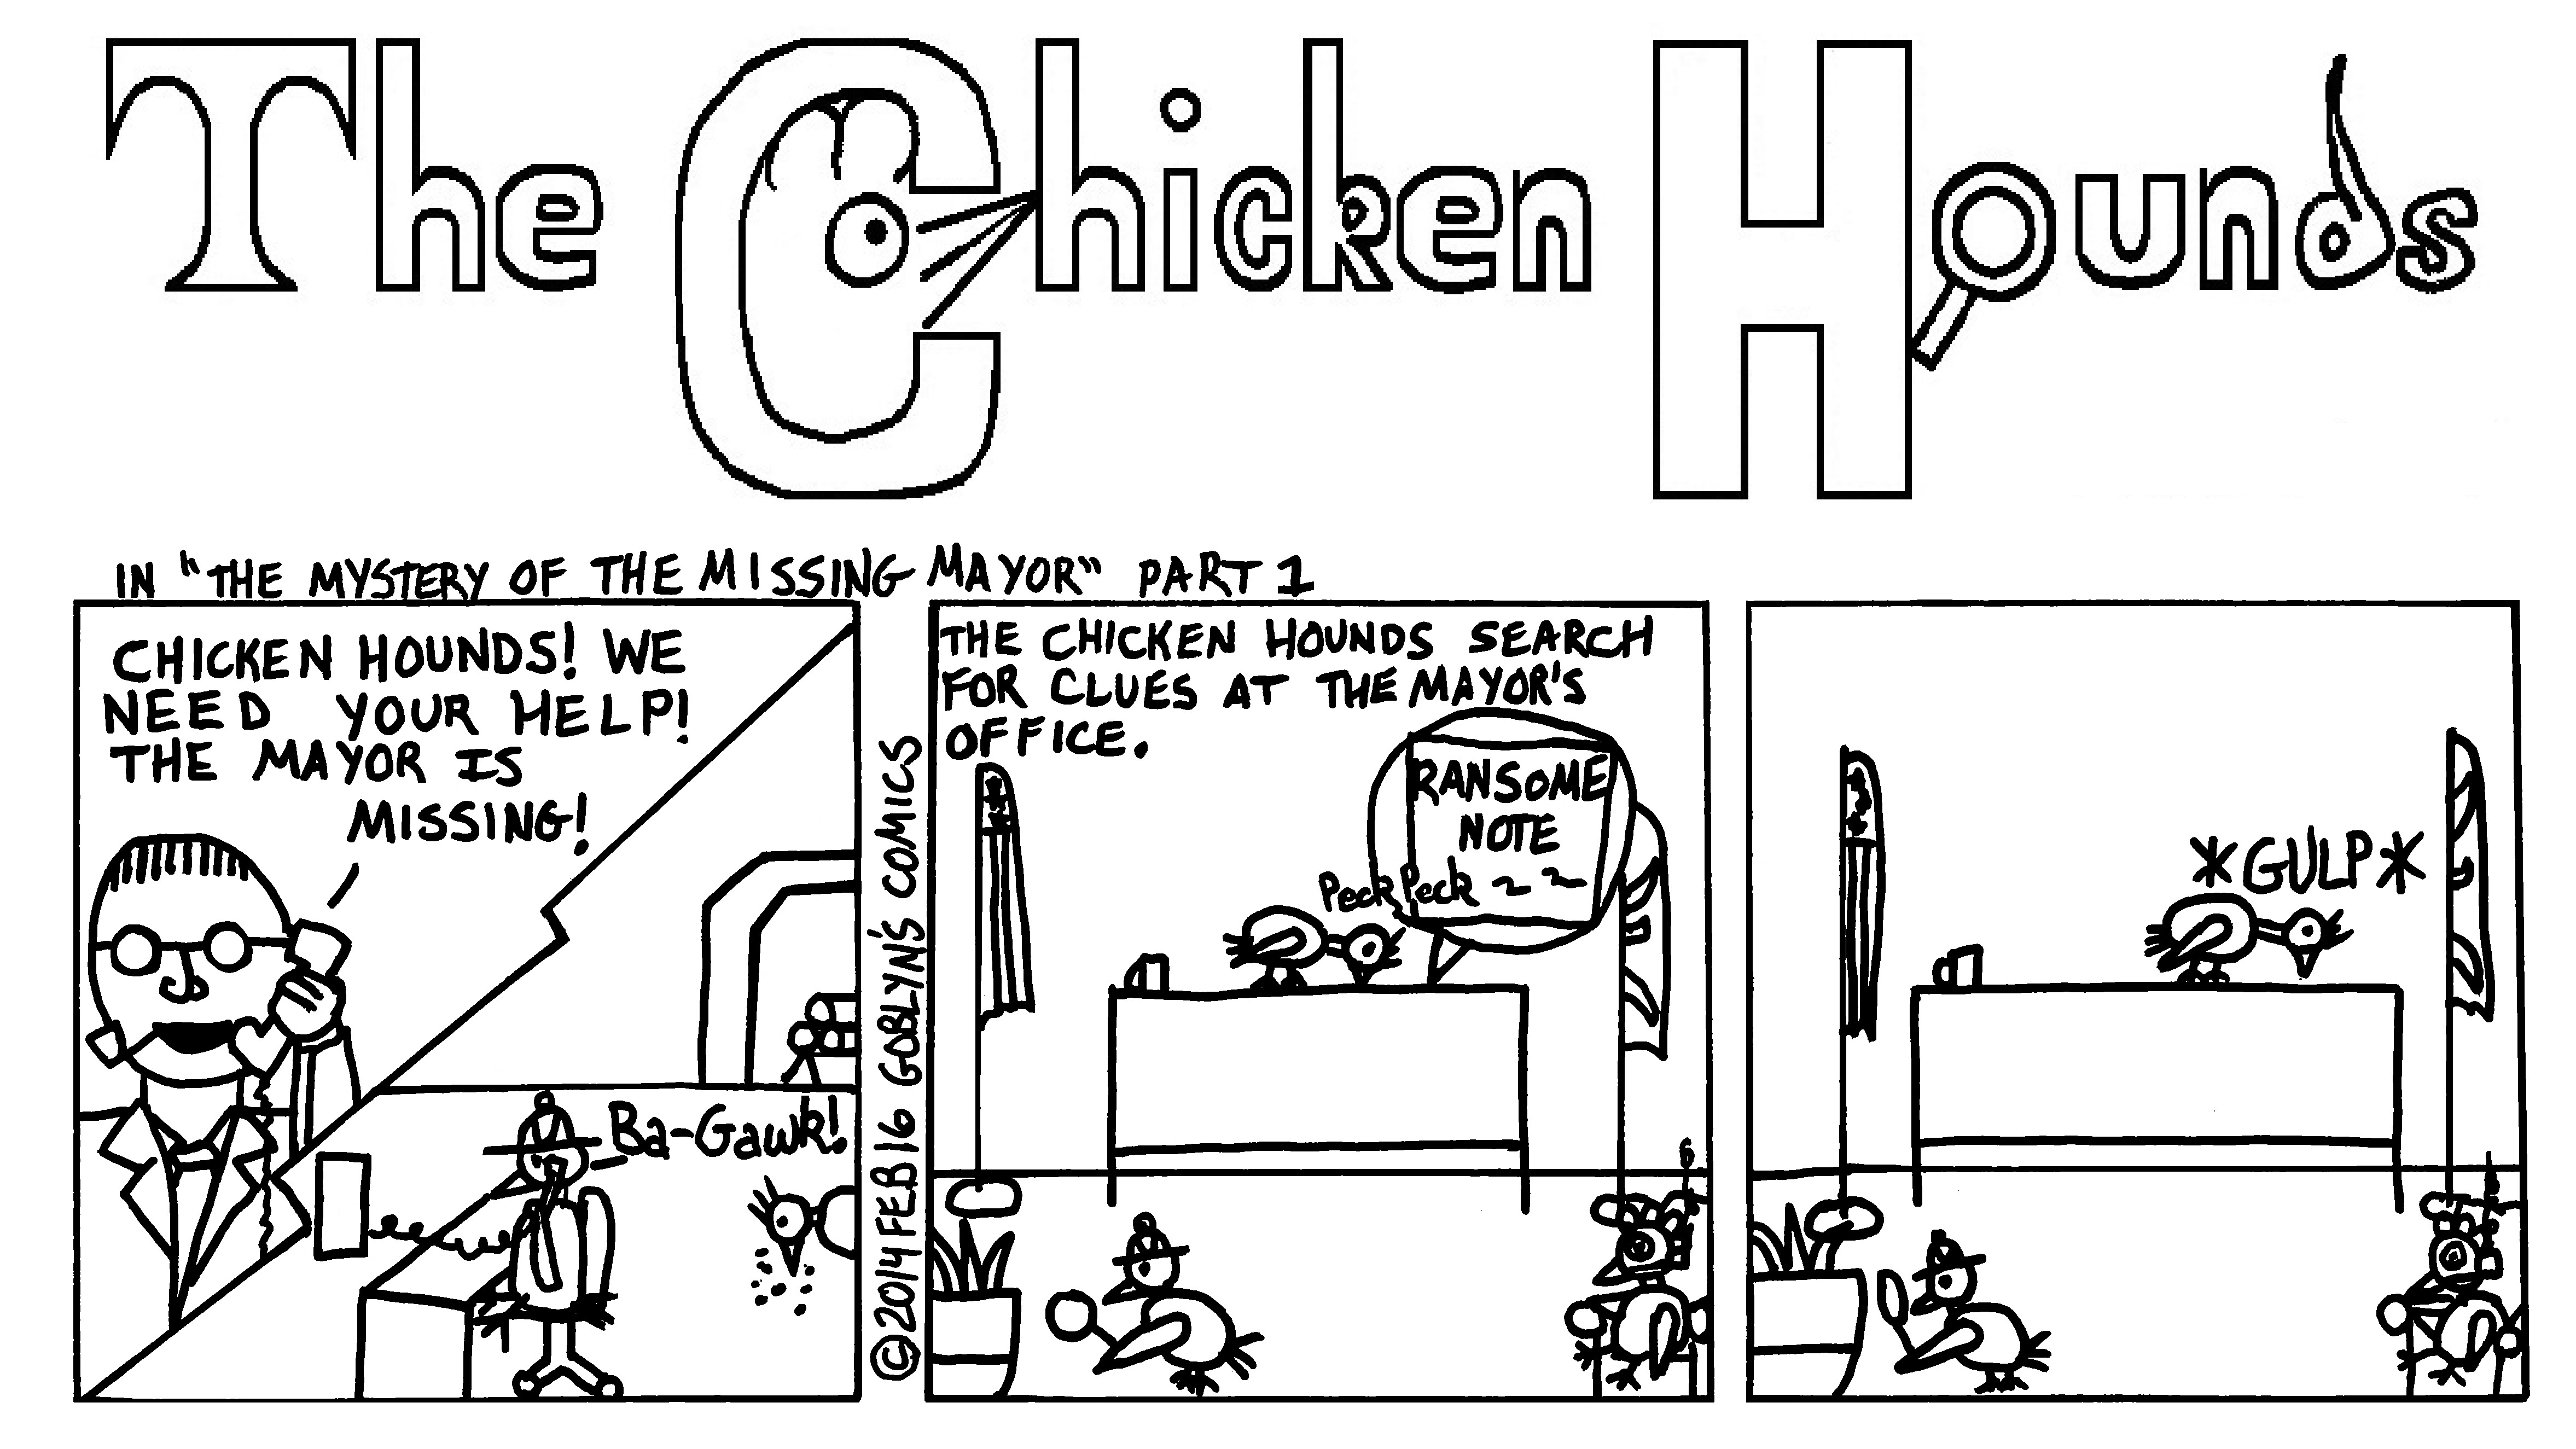 The Chicken Hounds, San Francisco's Greatest Detectives, in "The Mystery of the Missing Mayor" Part 1.